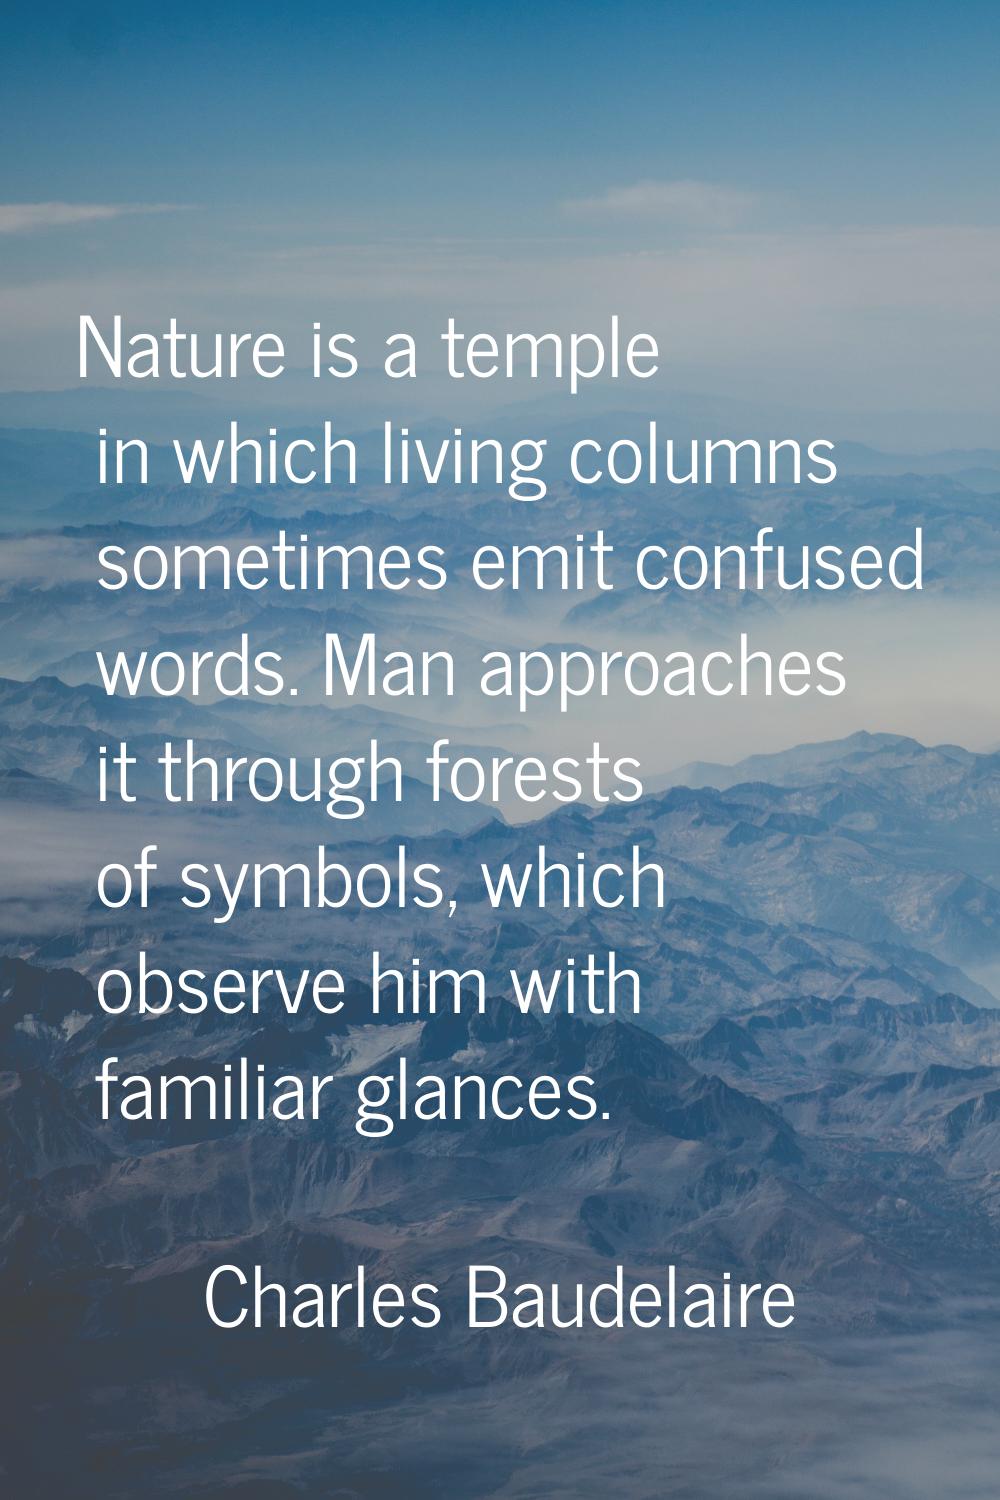 Nature is a temple in which living columns sometimes emit confused words. Man approaches it through